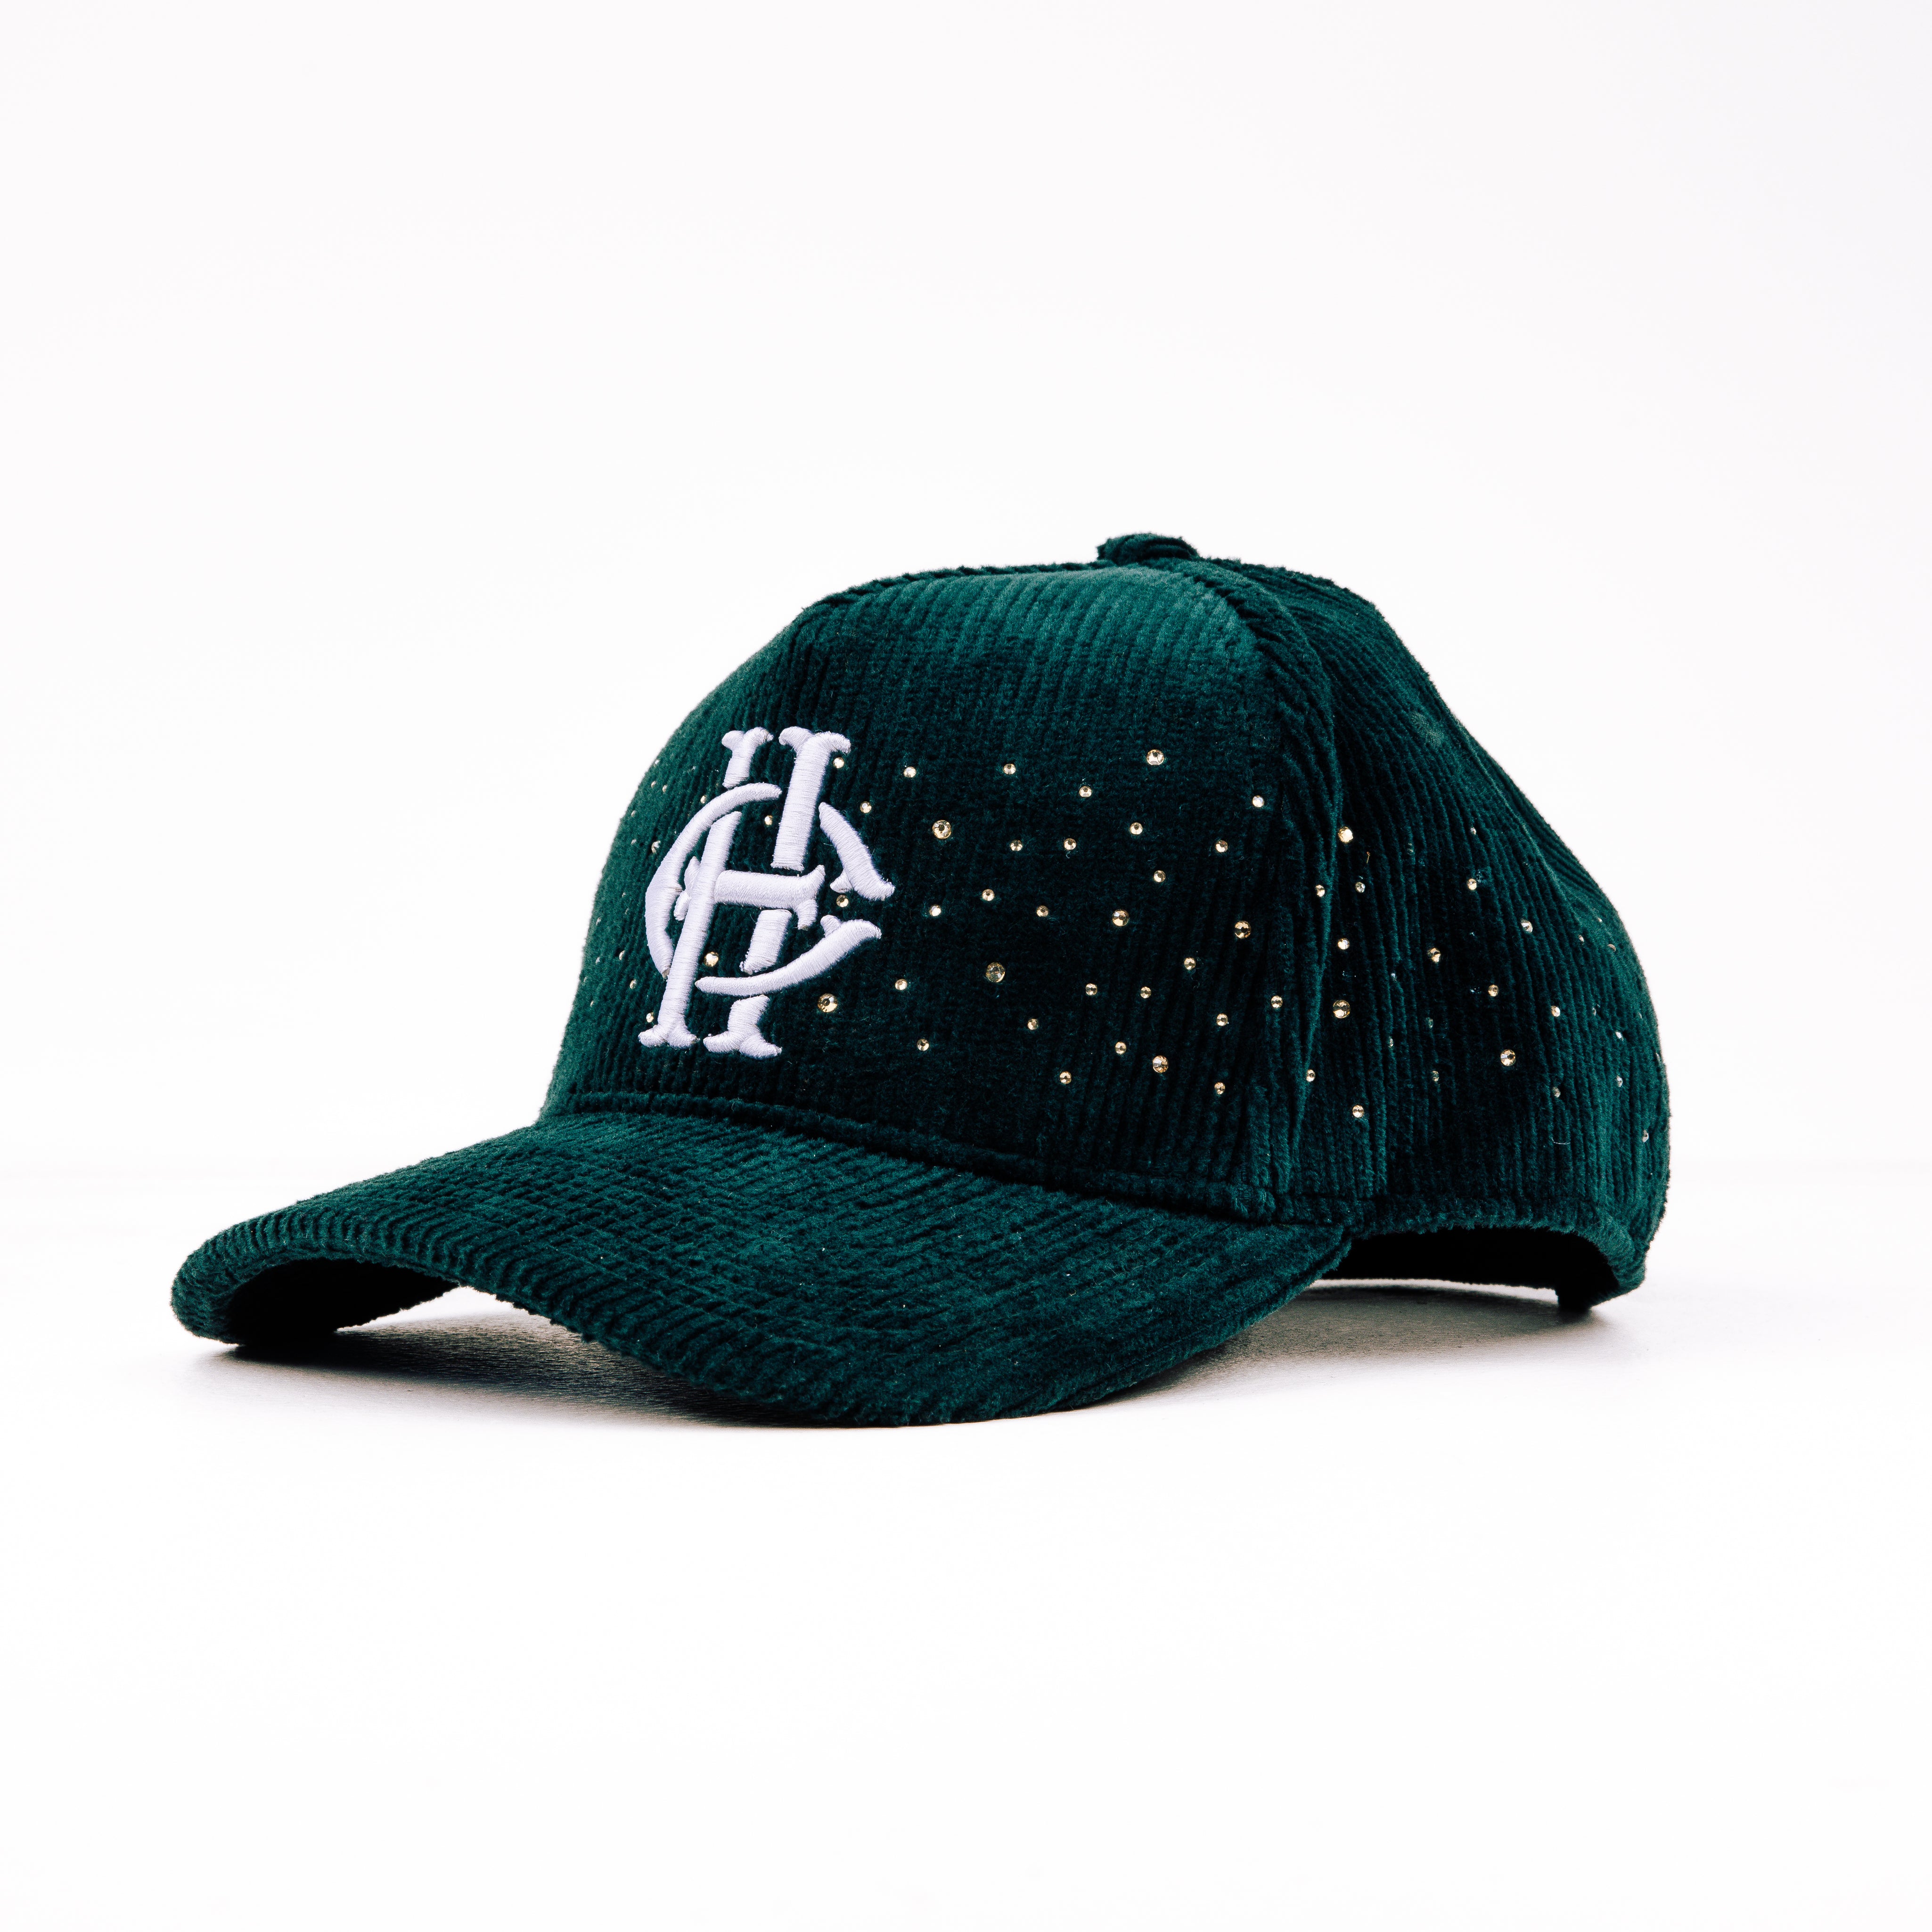 Common Hype “Crystal’d” Corduroy Hat (1 of 1) - H6